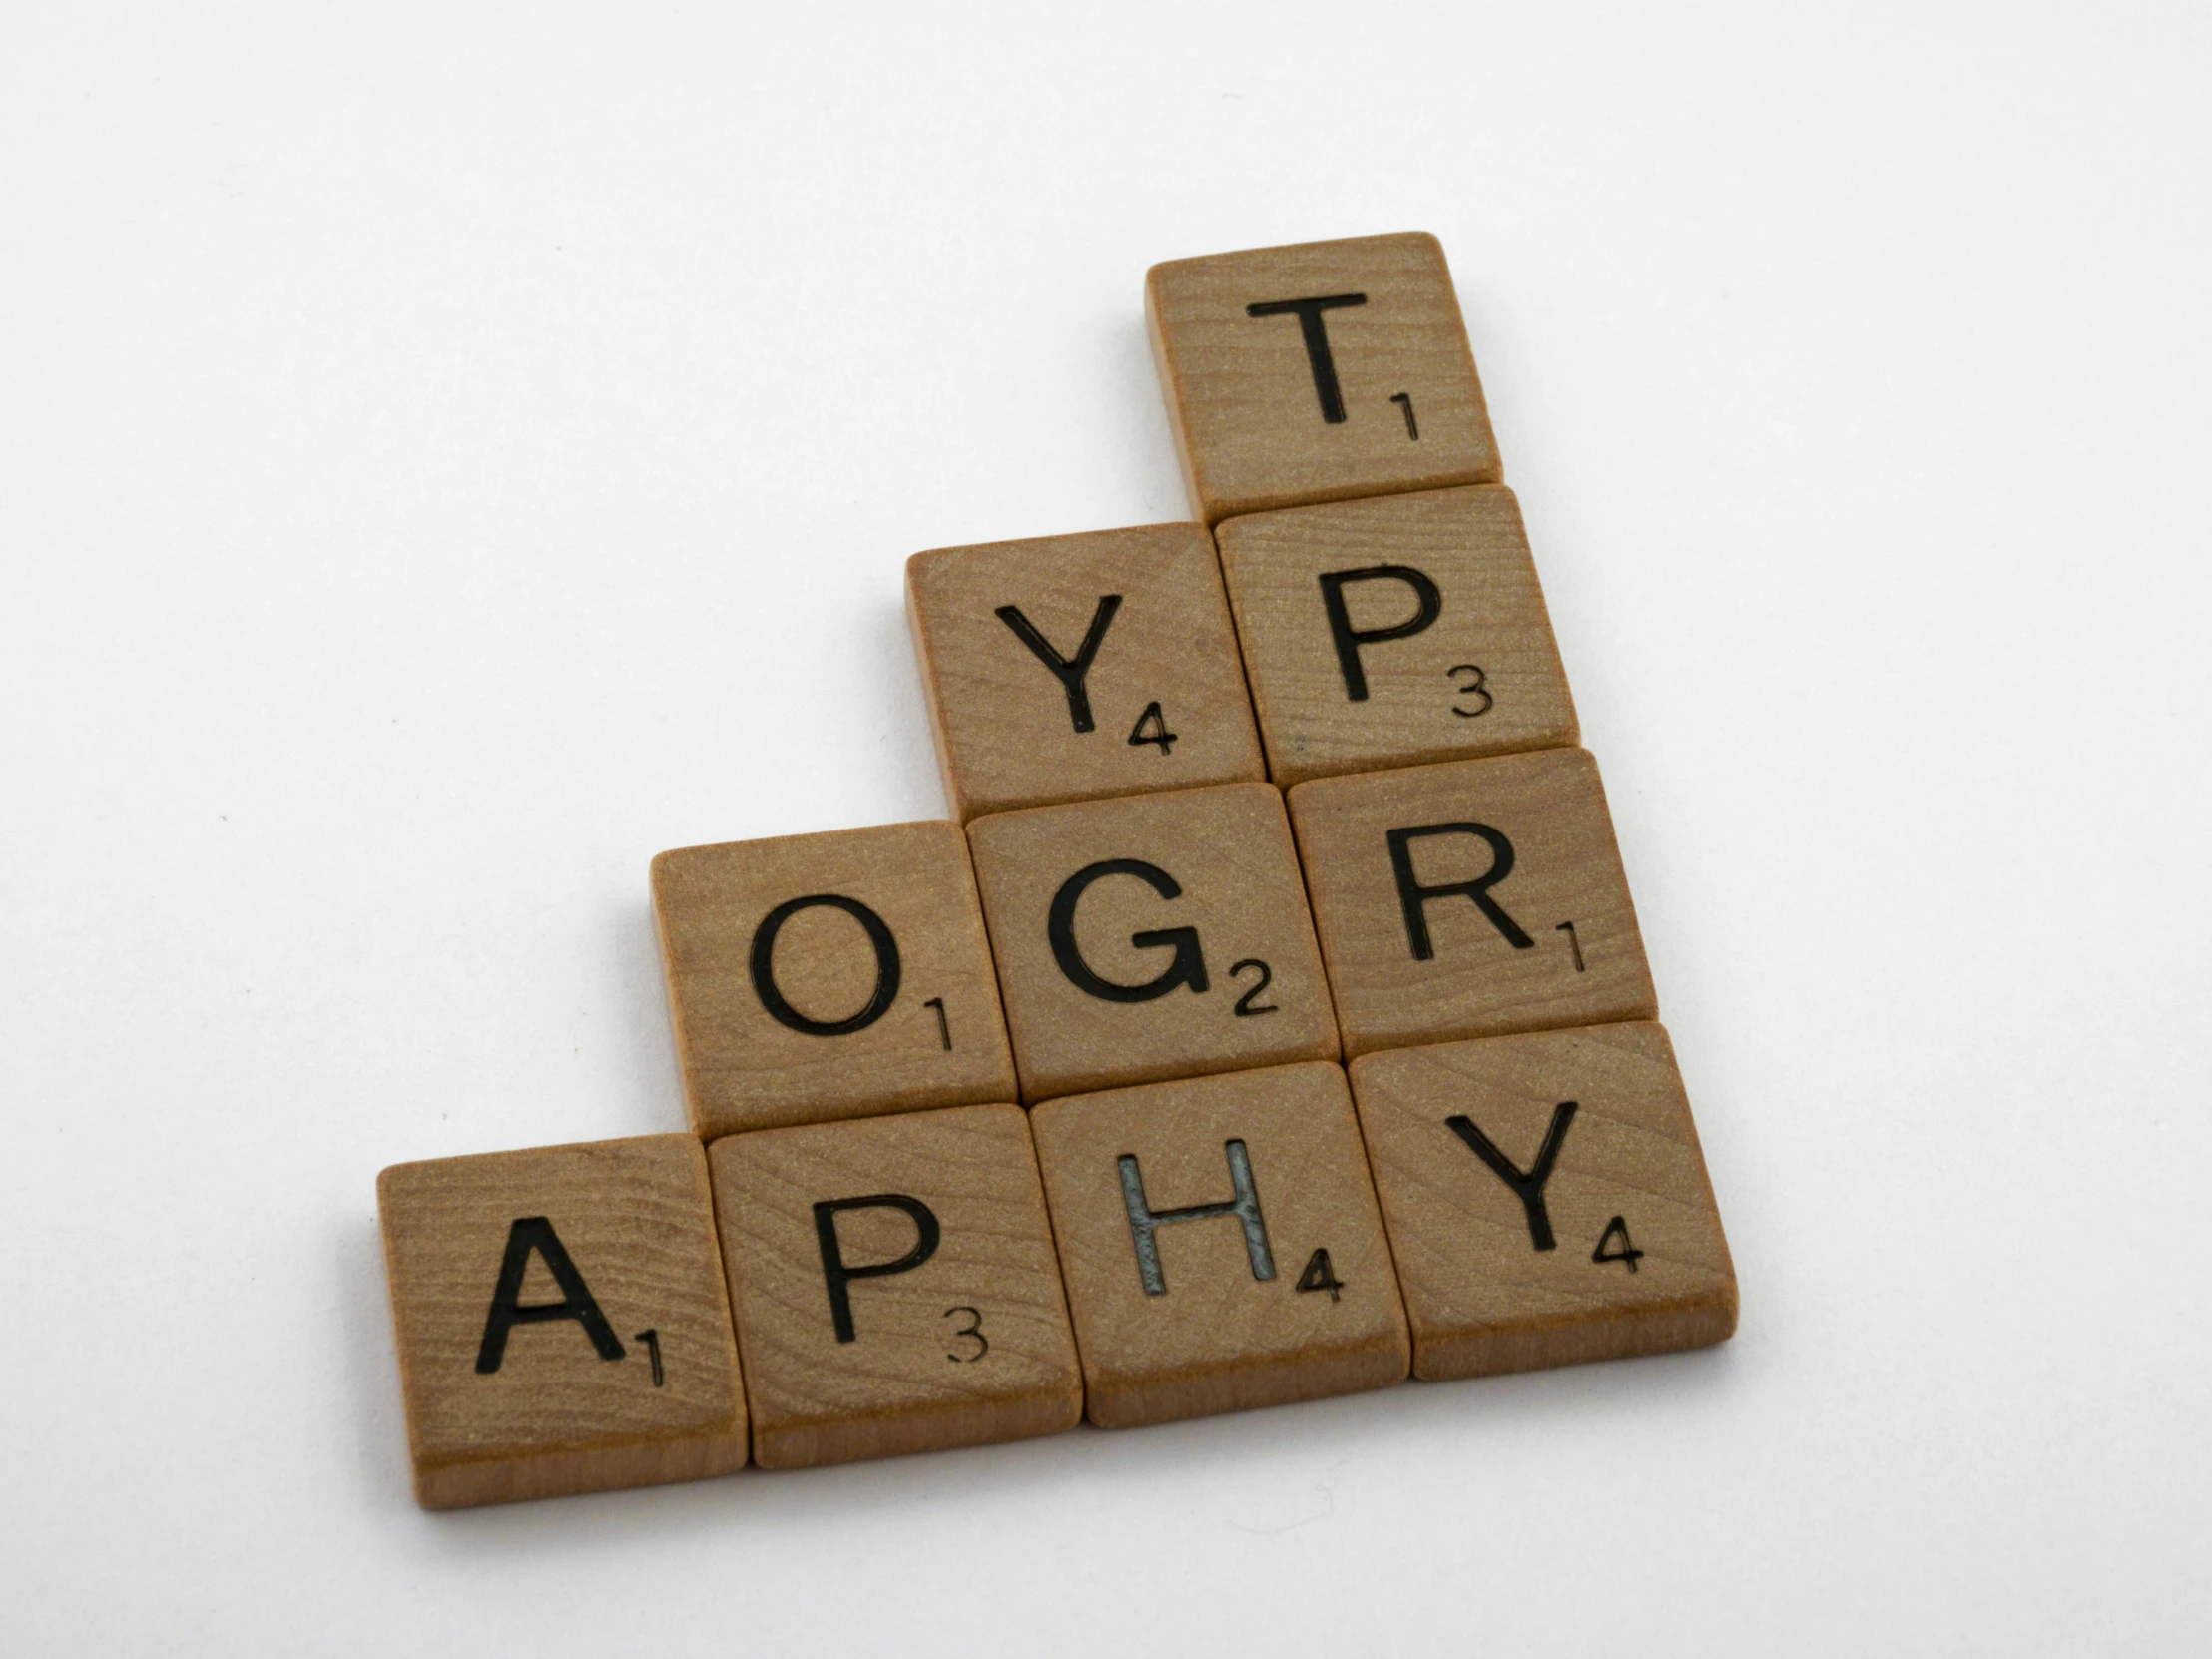 a scrabble tile pattern of letters arranged into a triangular